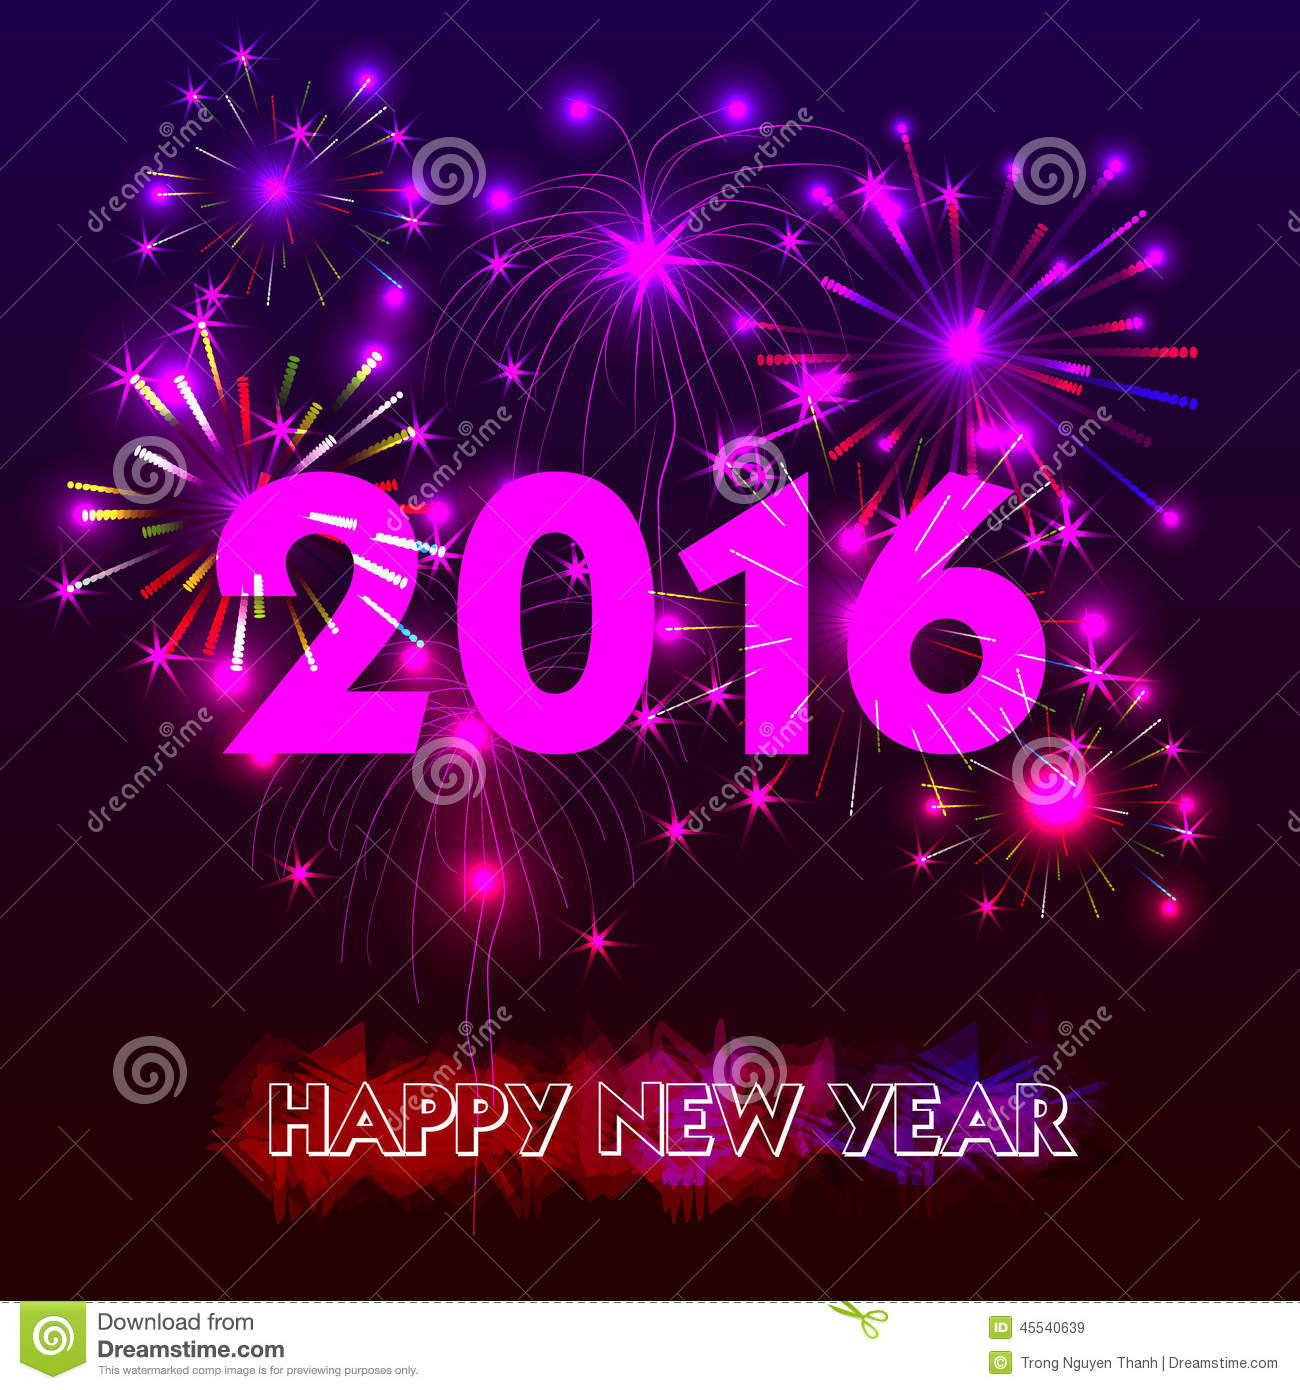 Happy New Year With Fireworks Background Illustration